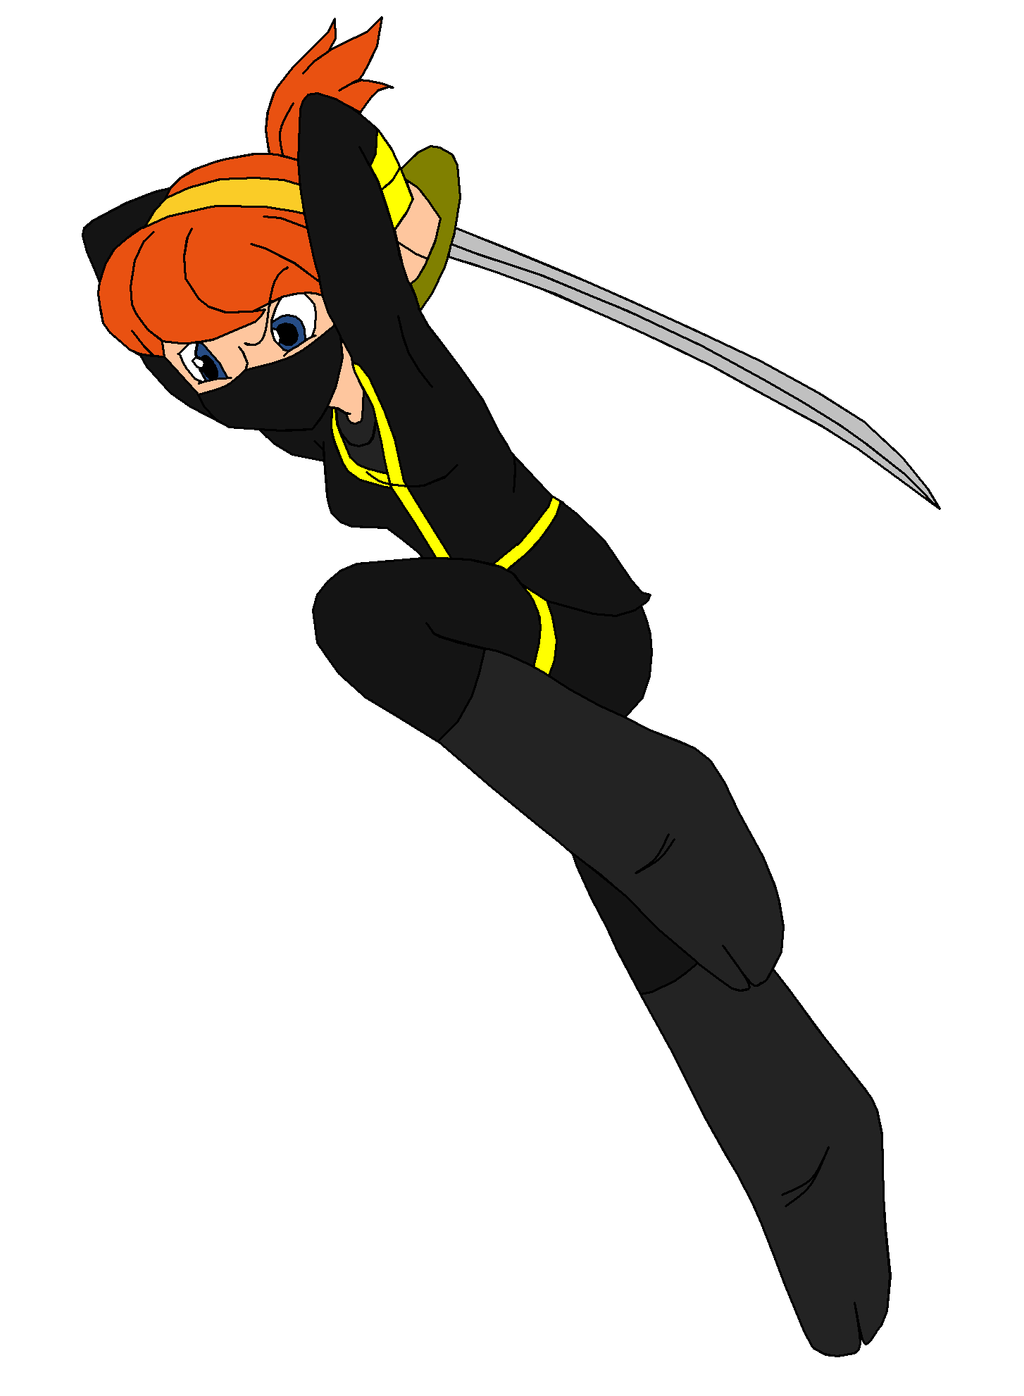 A Possible Ninja by author92 on DeviantArt